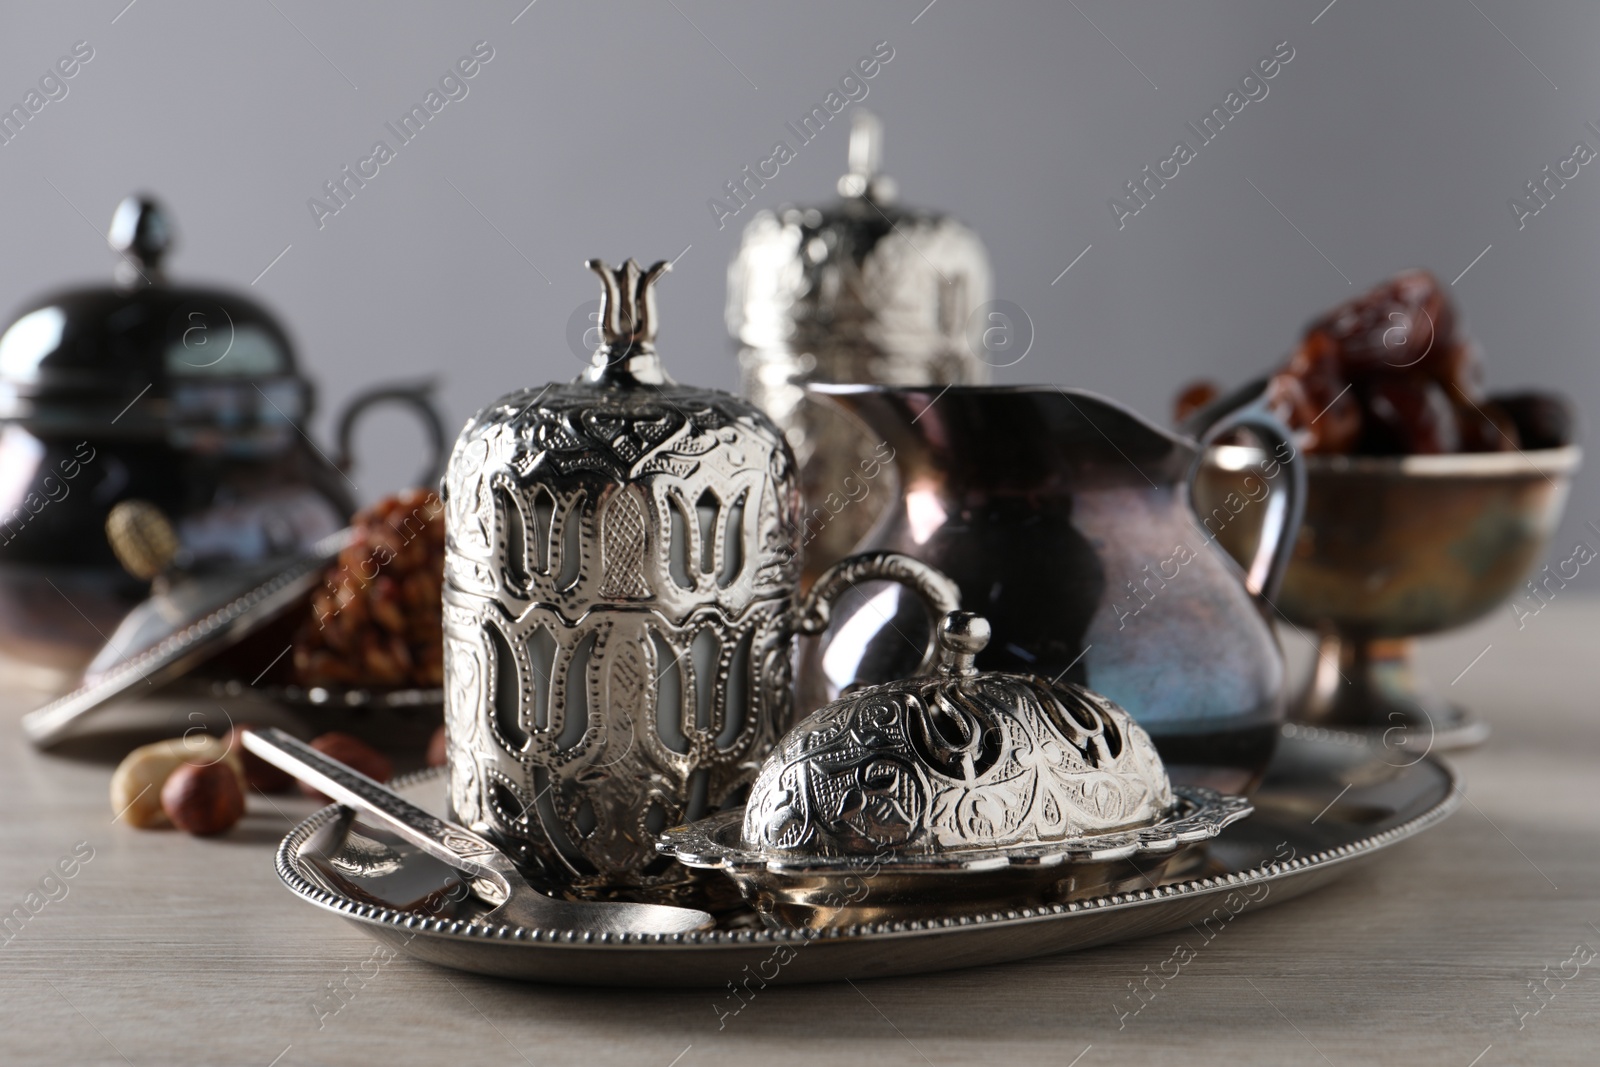 Photo of Tea, date fruits and Turkish delight served in vintage tea set on wooden table